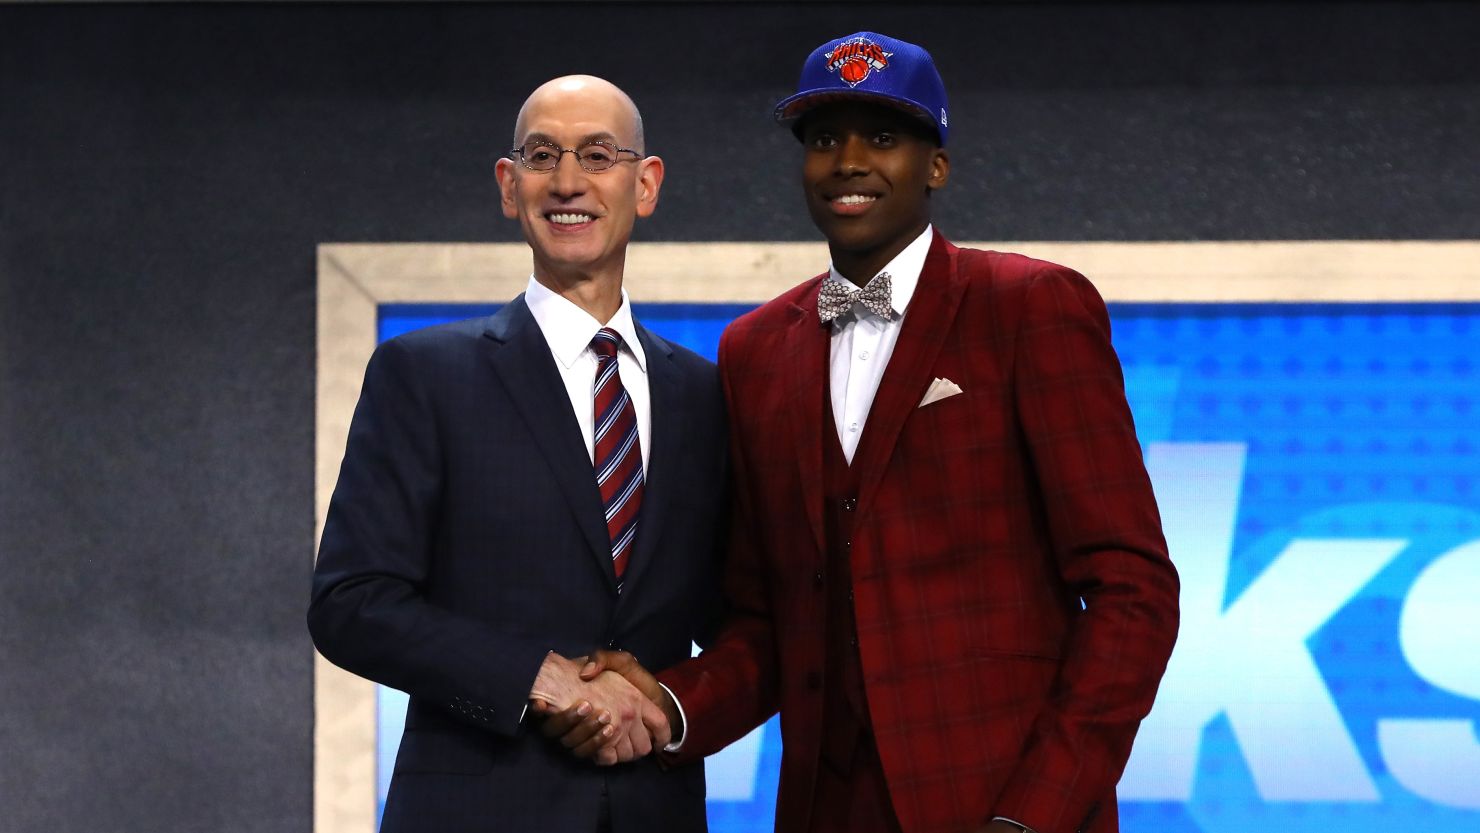 Frank Ntilikina walks on stage with NBA commissioner Adam Silver after being drafted.